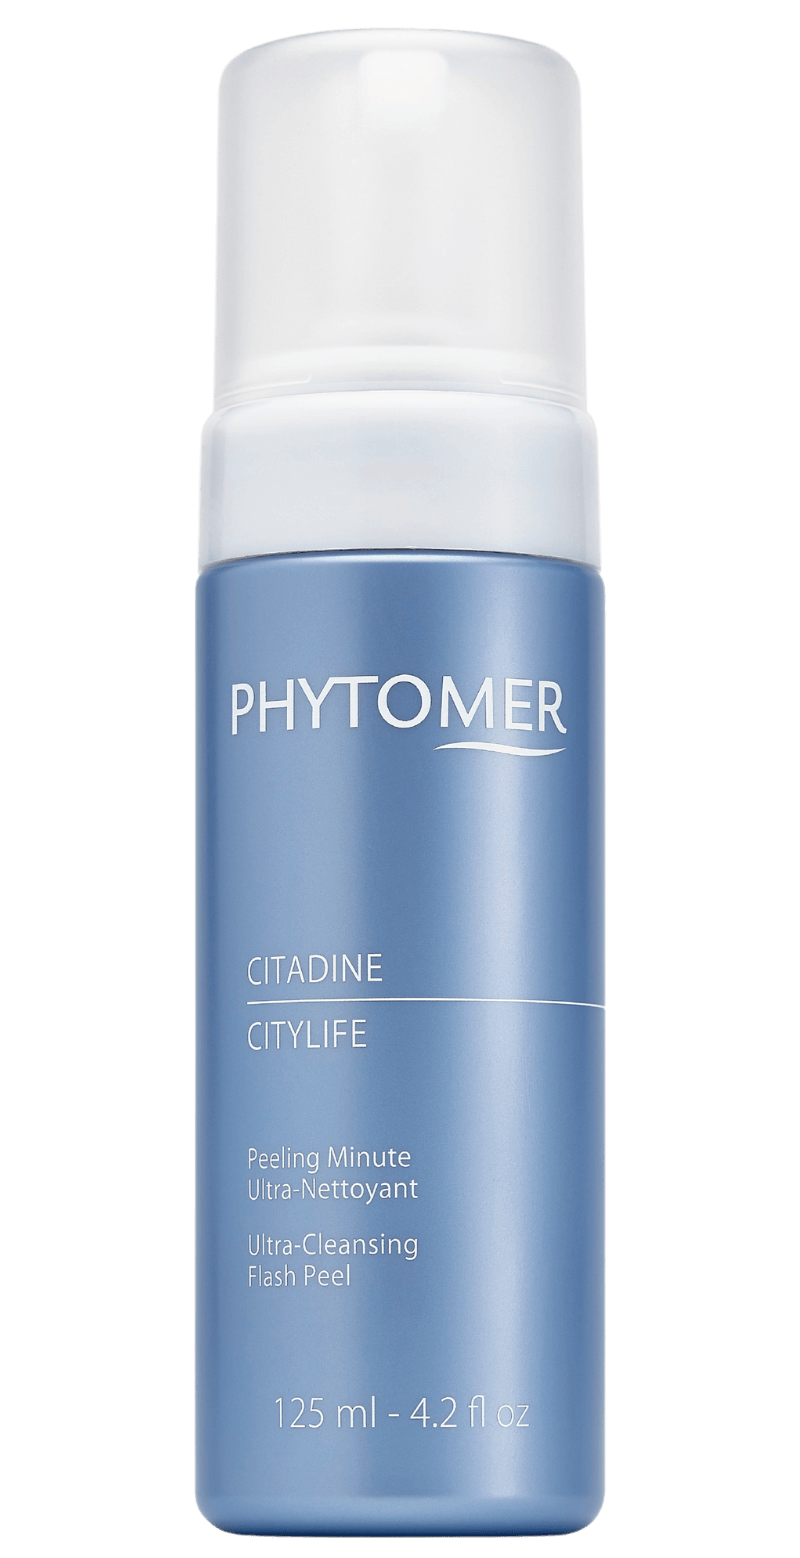 's Phytomer CITYLIFE Ultra-Cleansing Flash Peel - Bellini's Skin and Parfumerie 